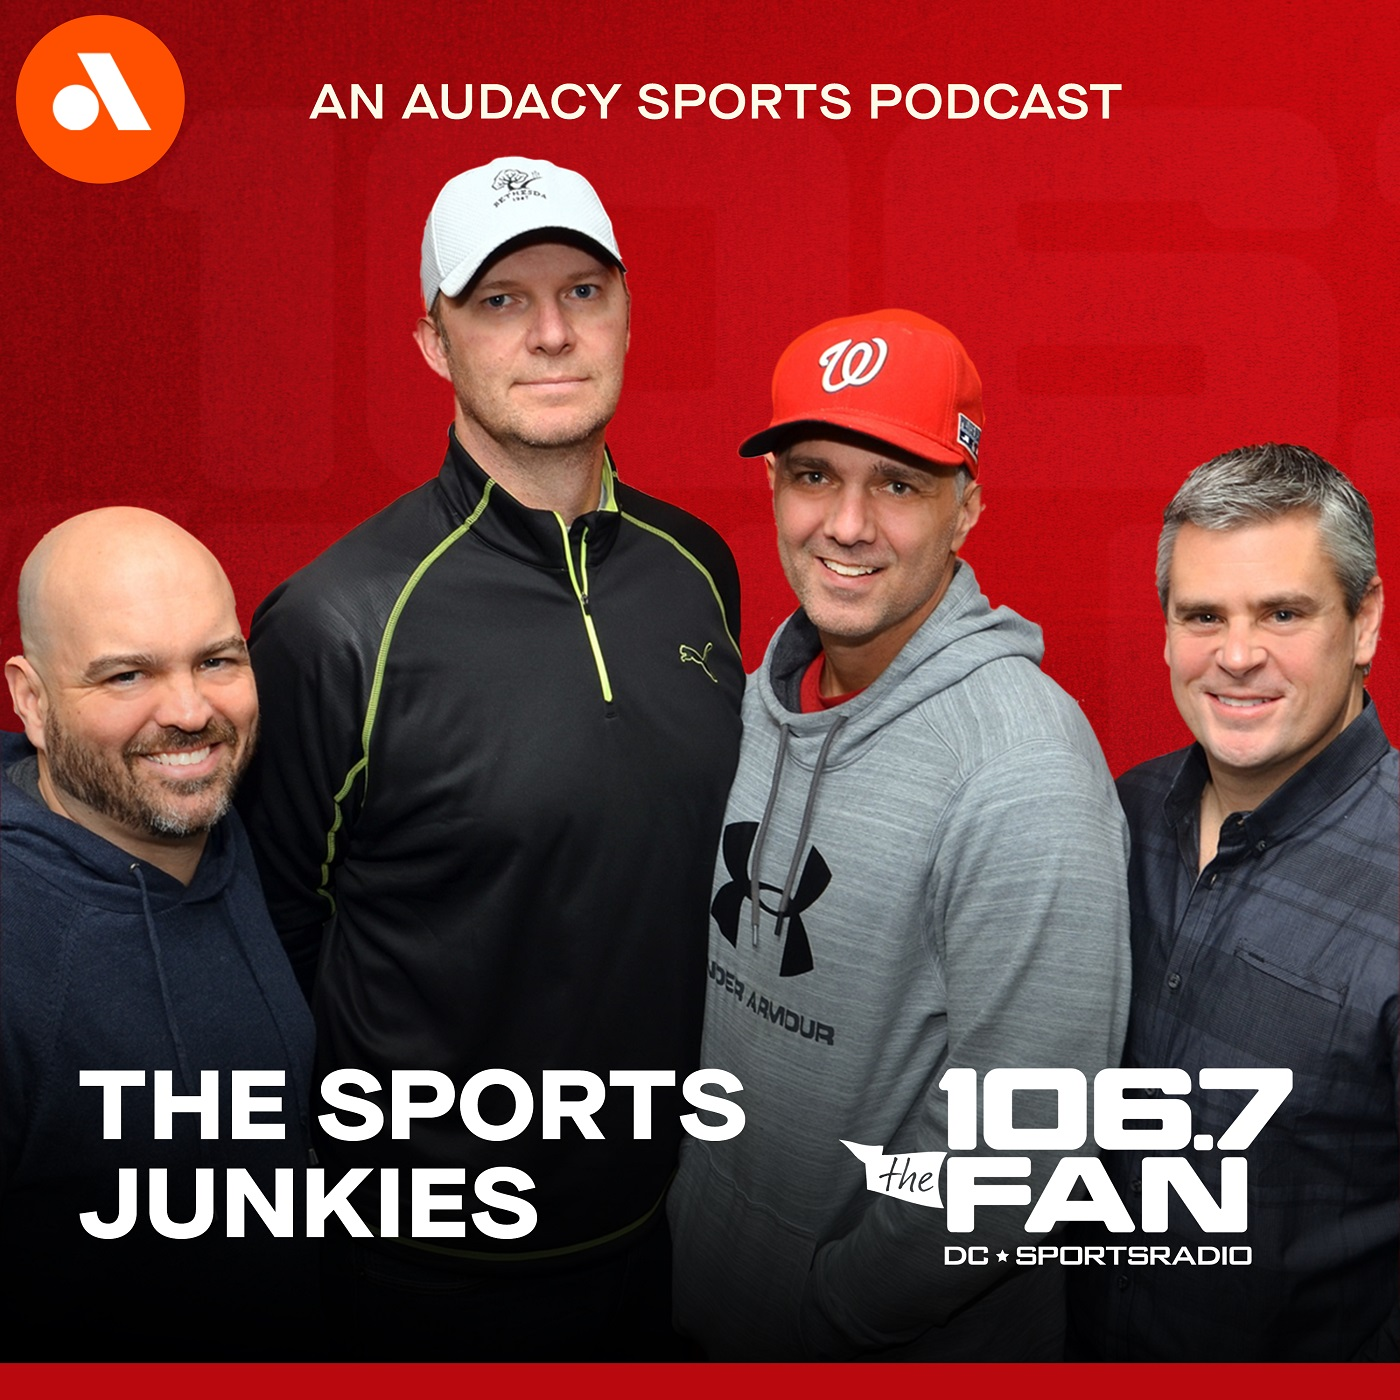 6/15 Hour 3- Hank Haney's Tiger story, Entertainment Page, Squeaker's Court